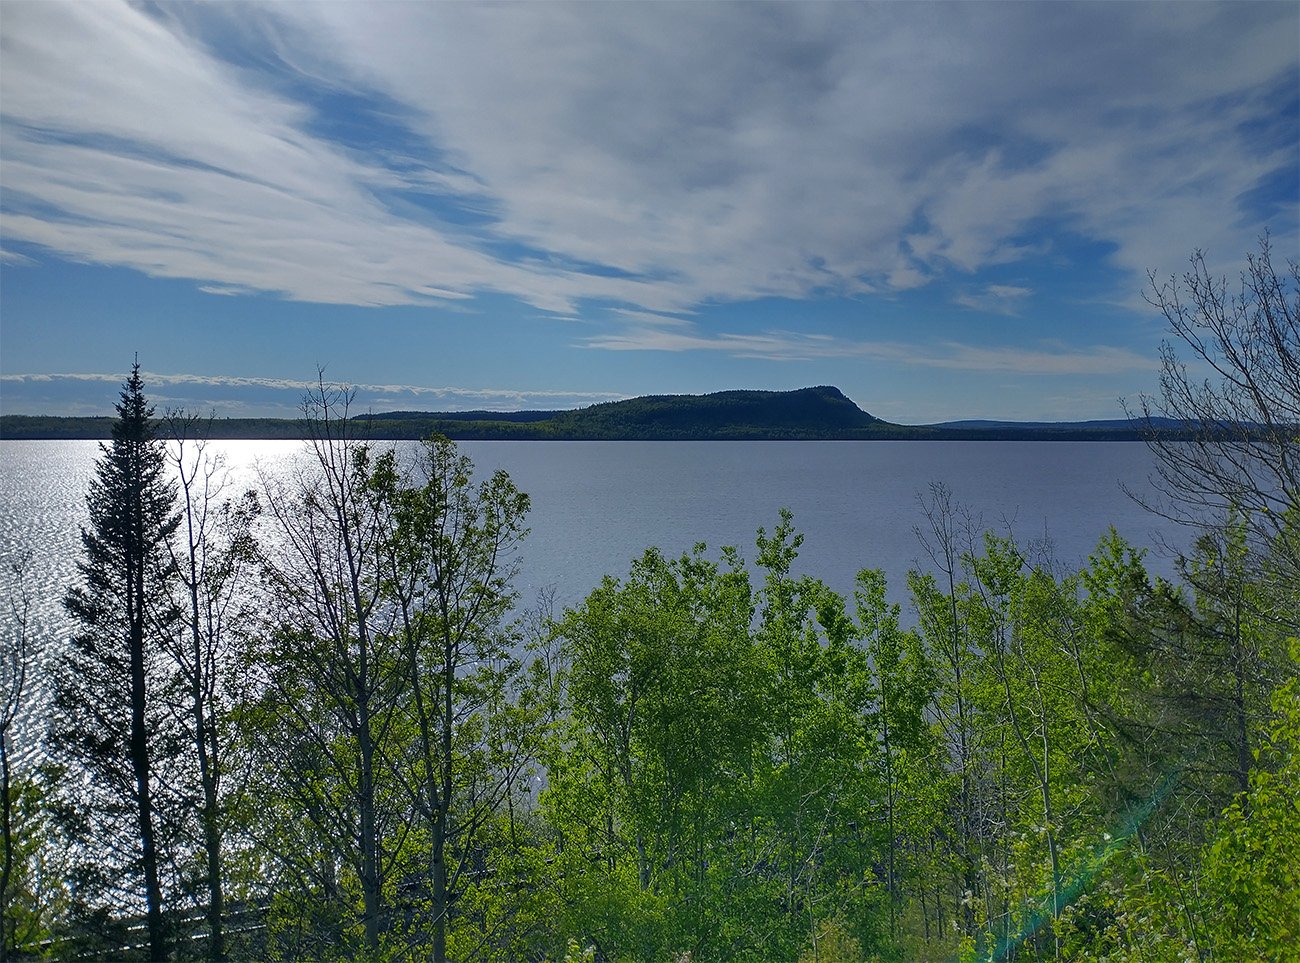 From Thunder Bay you can see the other side of Lake Superior, which is surrounded by these forested hills.